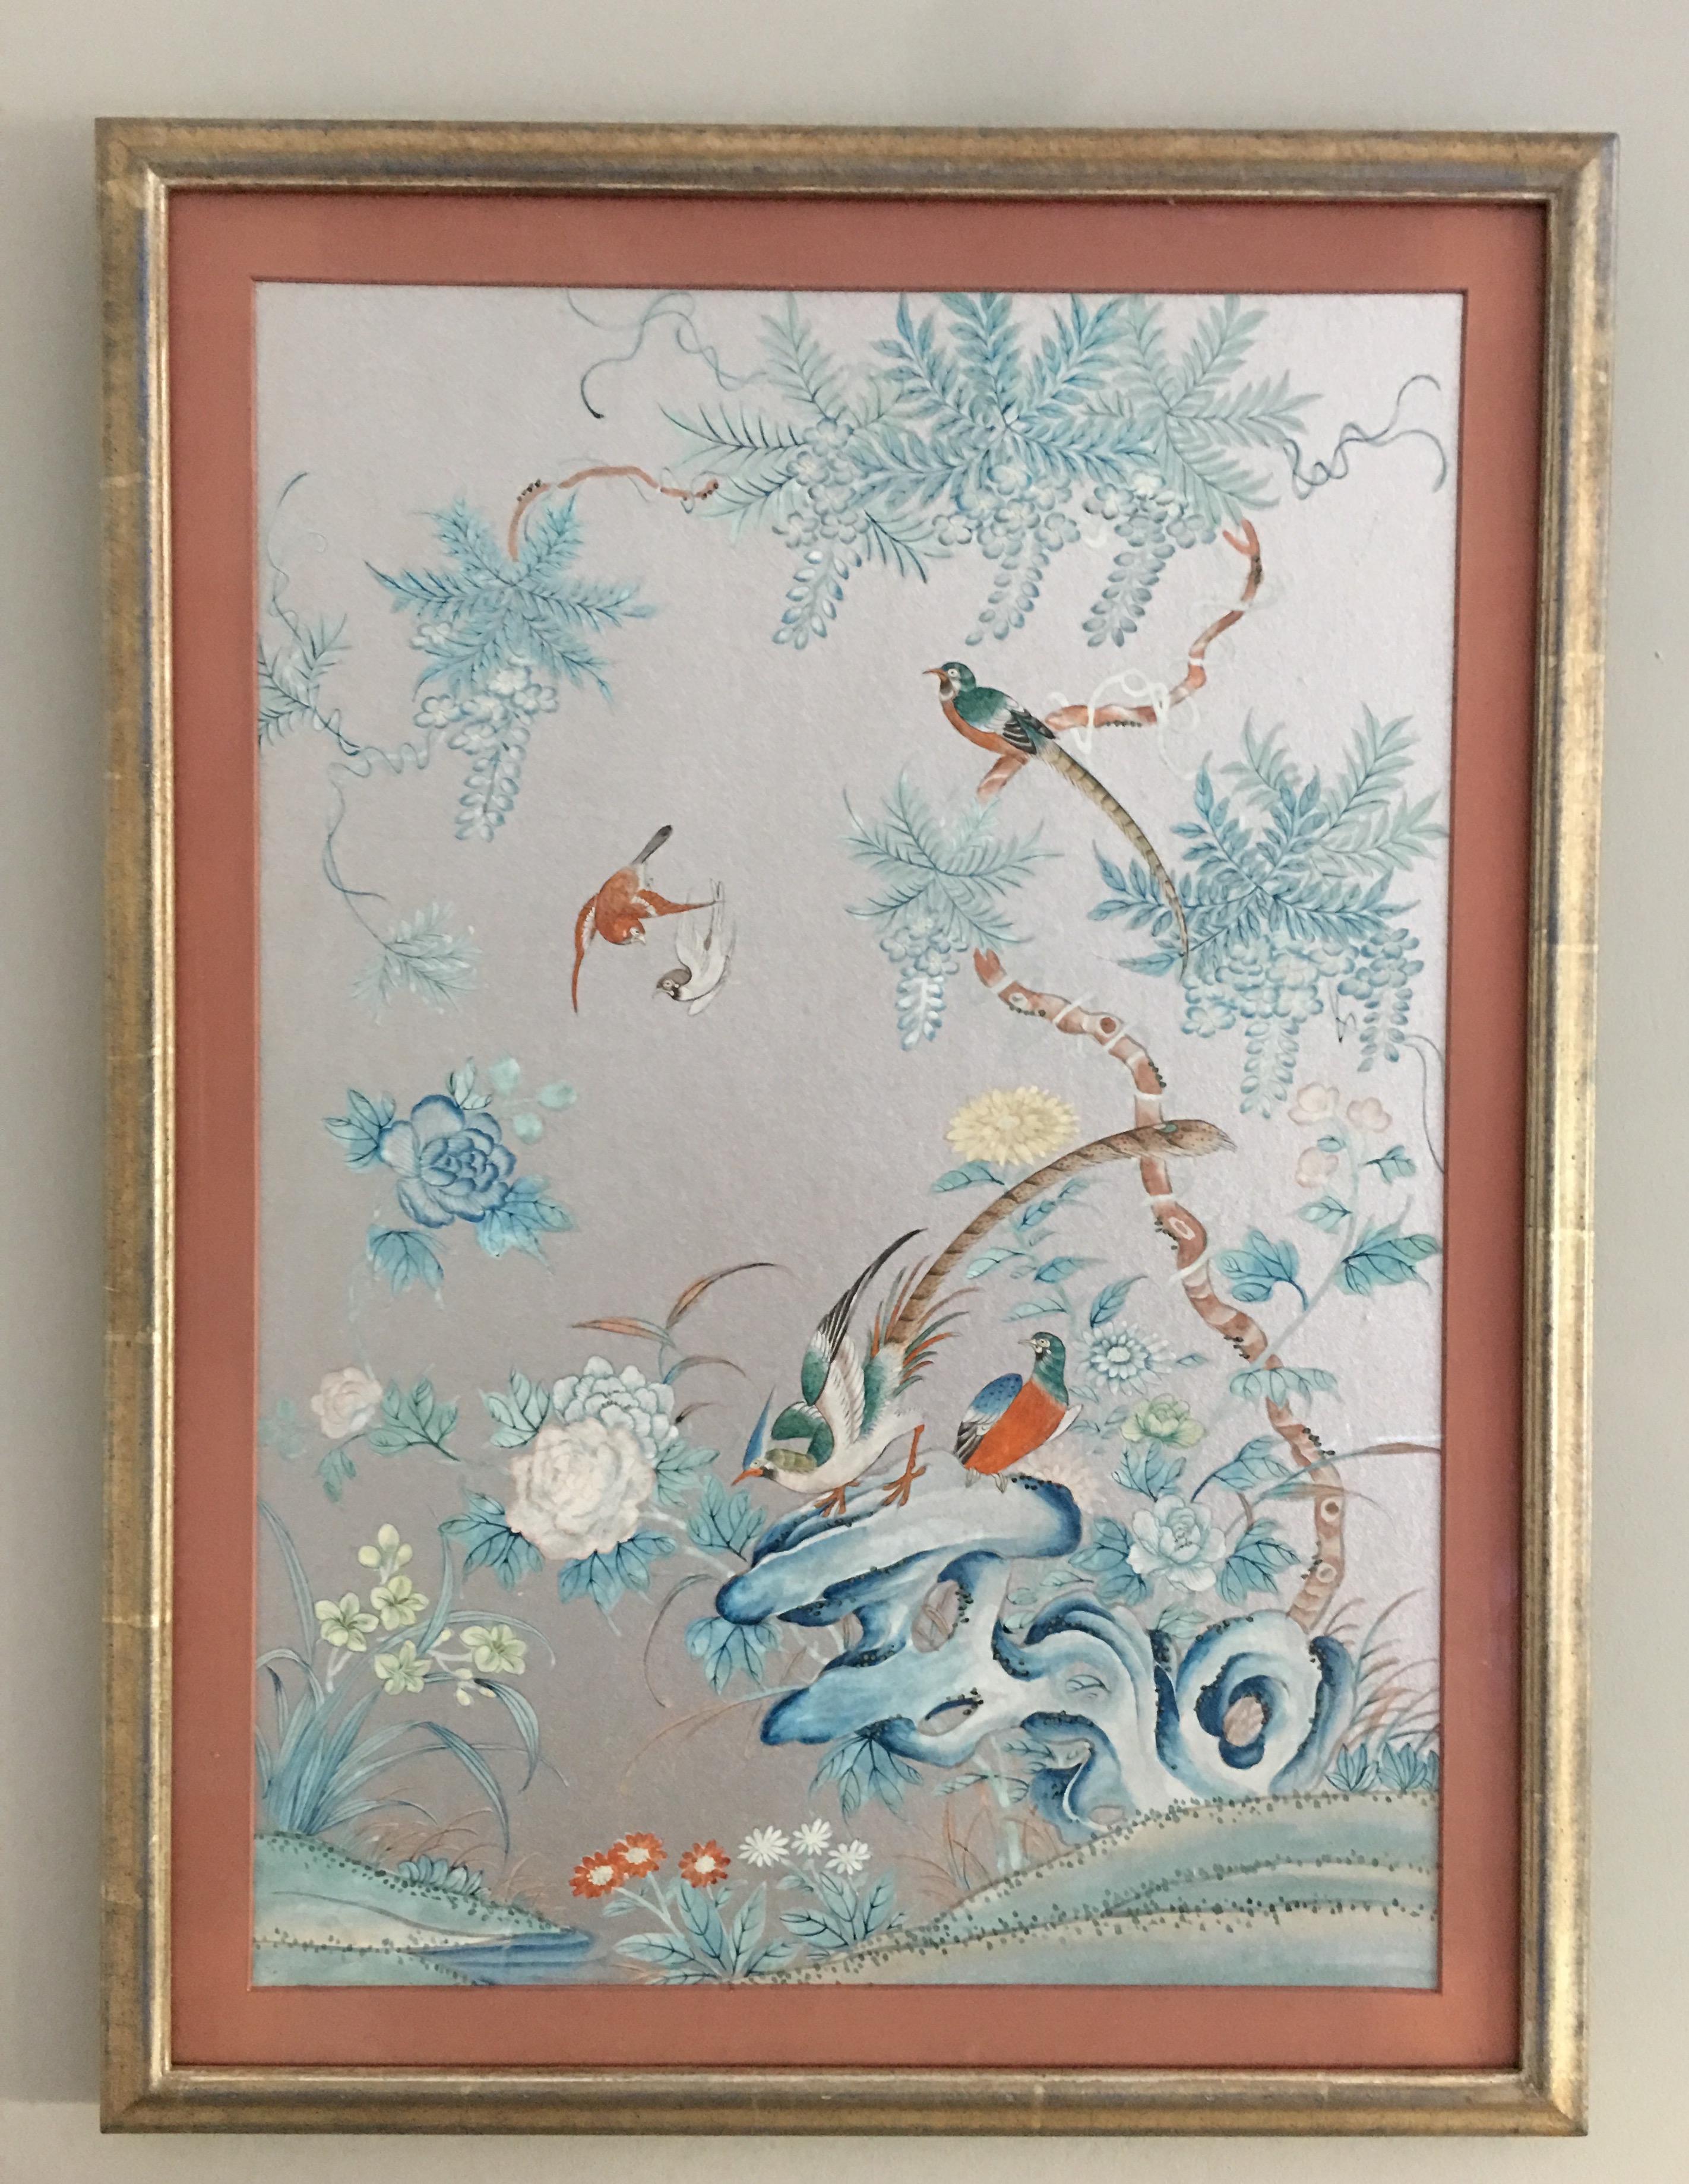 Pair of 1930s silver chinoiserie wallpaper remnant with hand-painted scenes of birds and trees. Newly custom framed in silver leaf frame with low glare glass. Each piece retains the original hand-painted salmon pink matting.